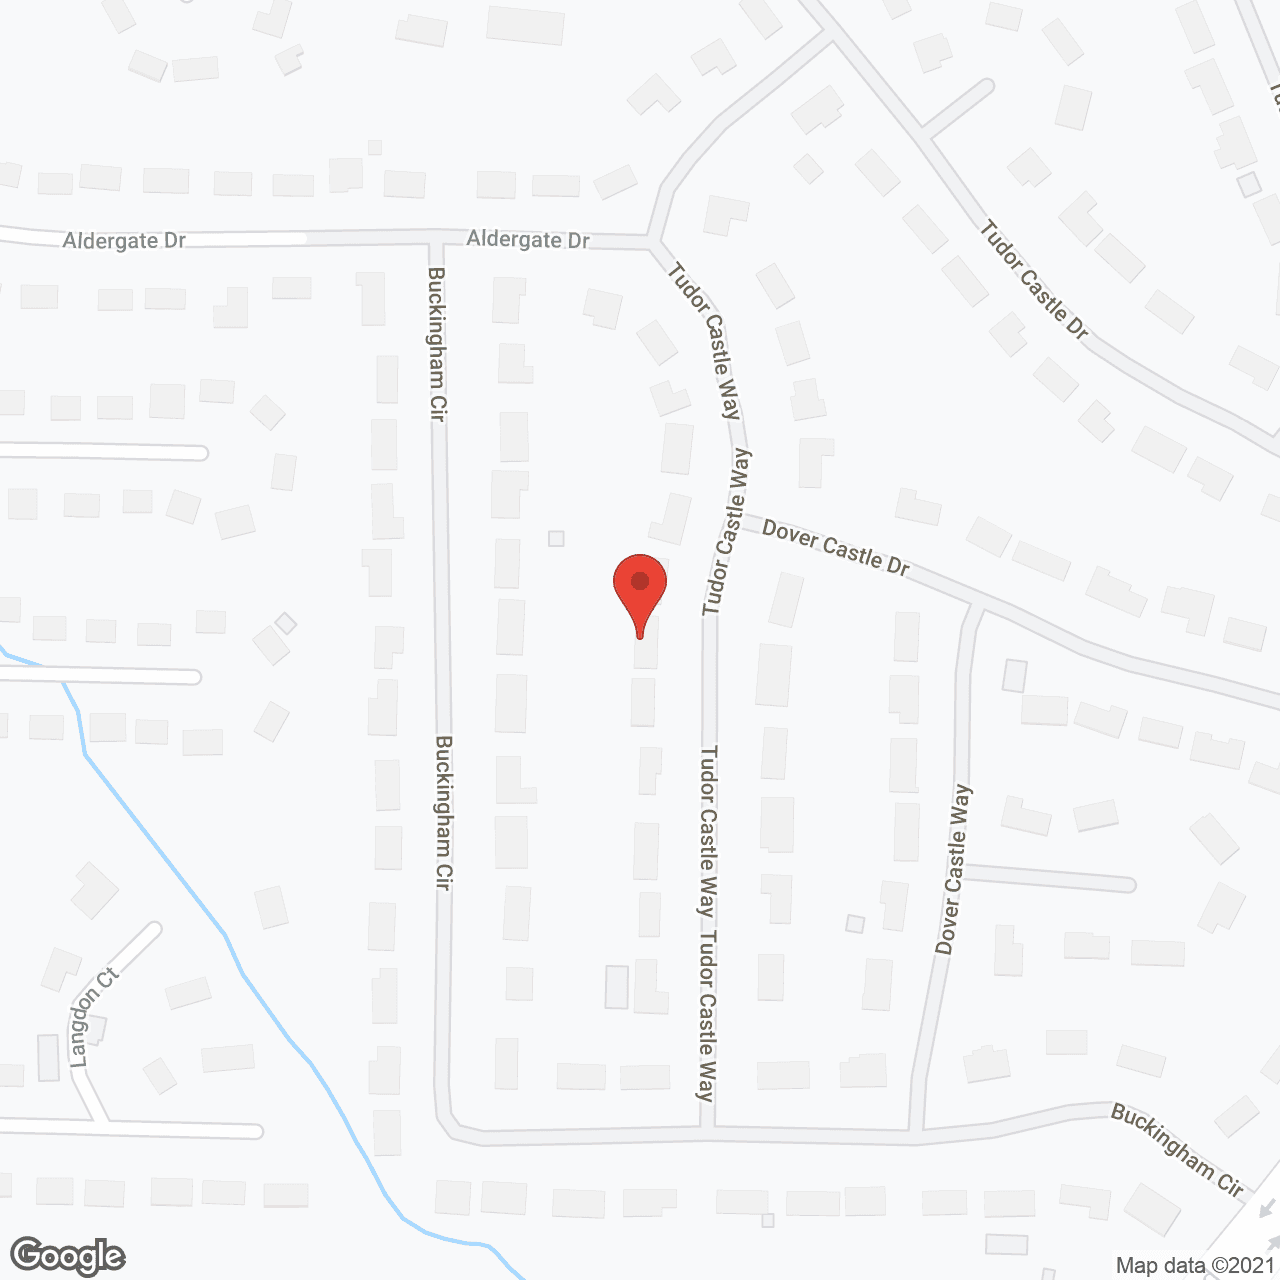 People's First Personal Care Home in google map